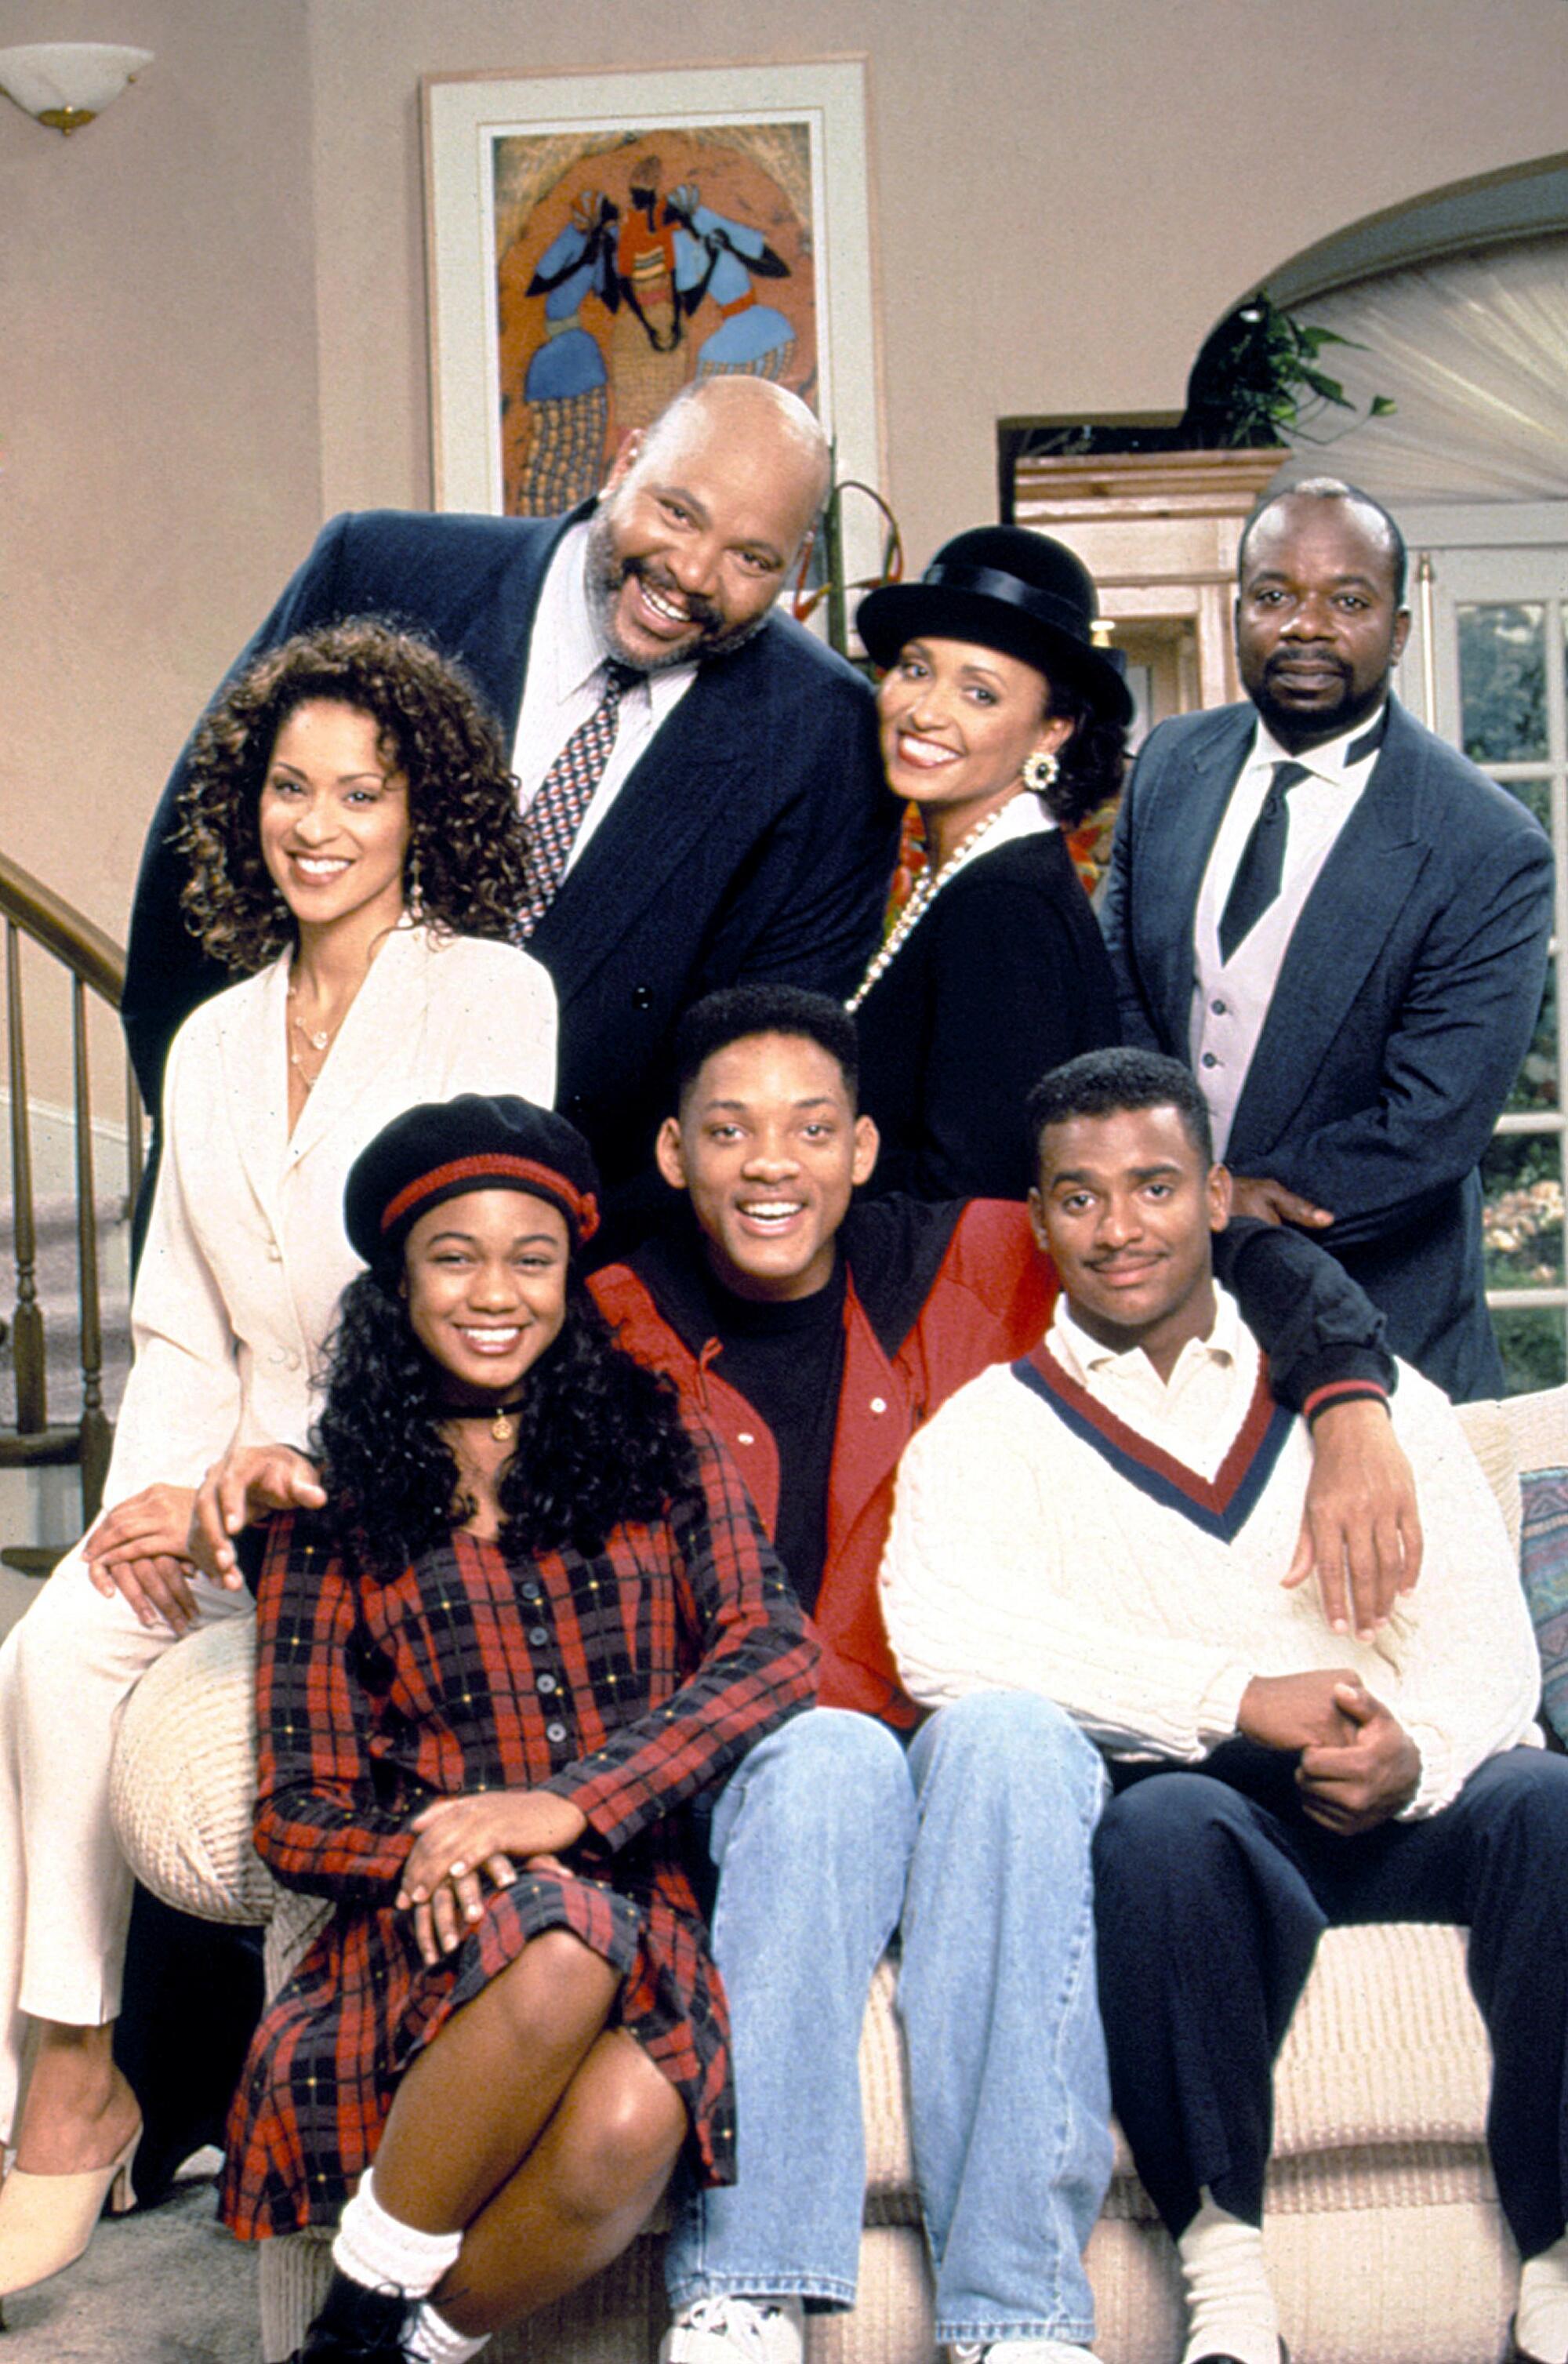 The cast of "The Fresh Prince of Bel Air."